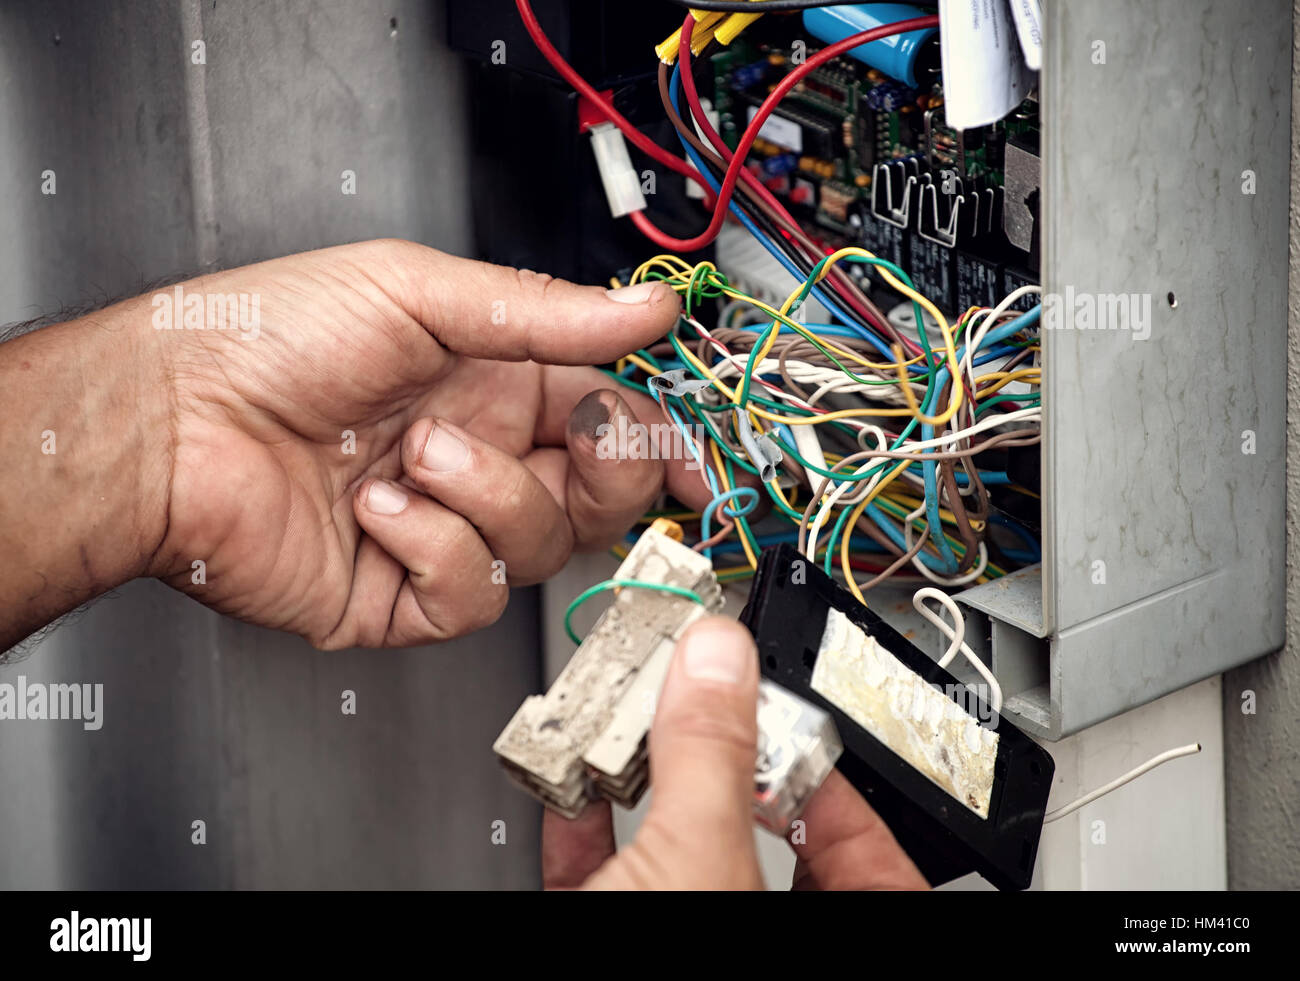 Electrician repairing electric system of an automatic gate. Stock Photo